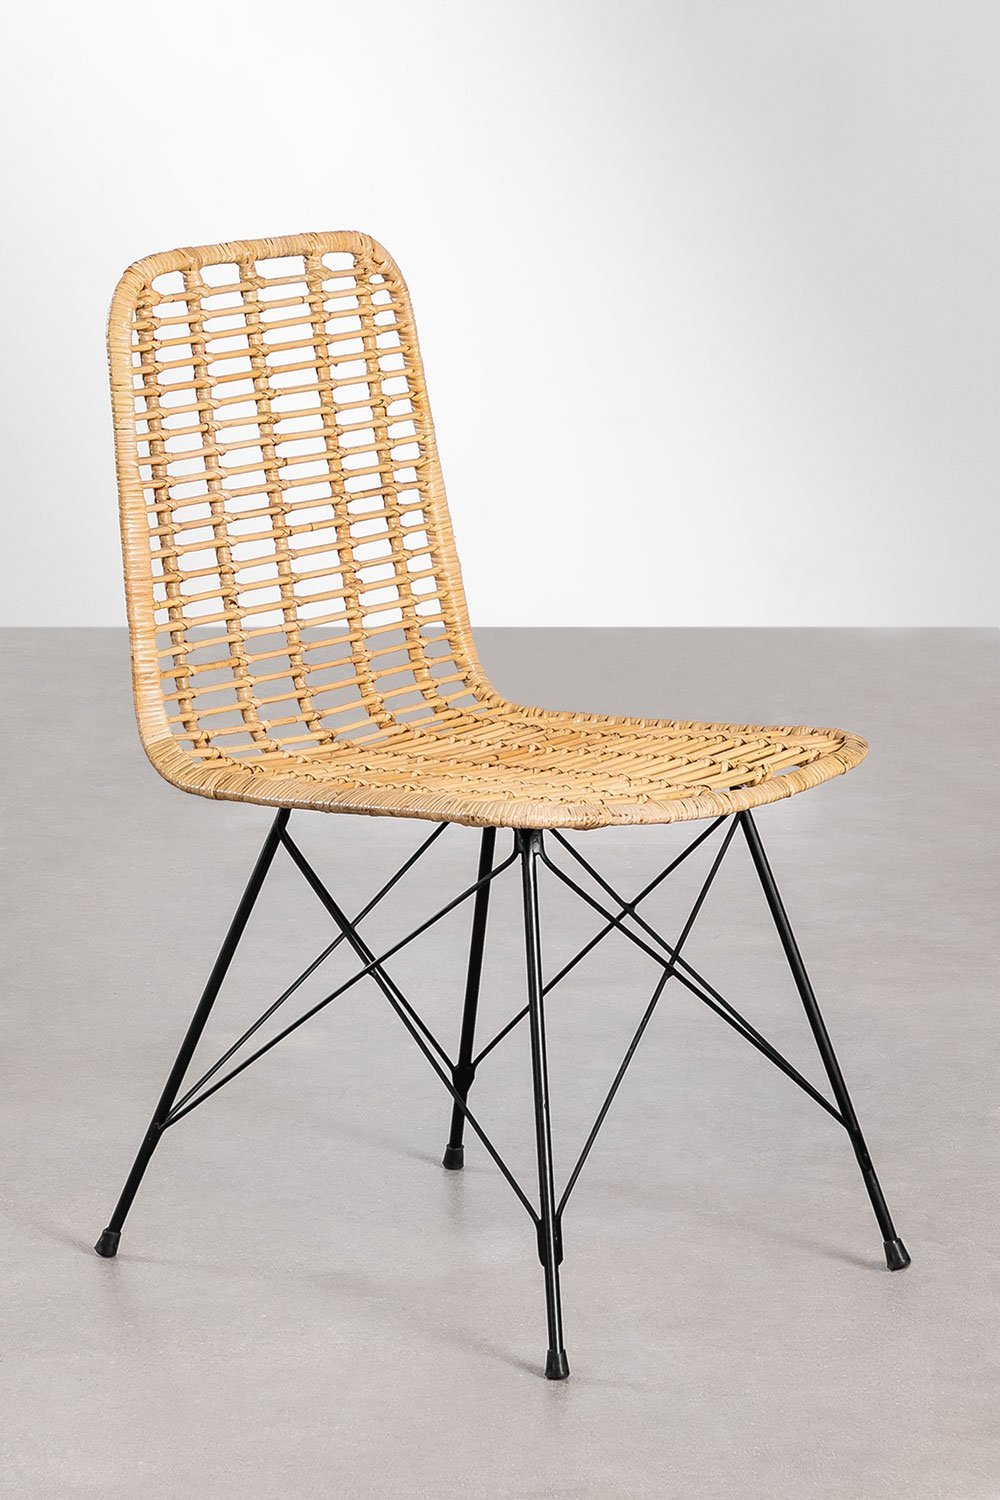 Rattan Garden Chair Likany, gallery image 1